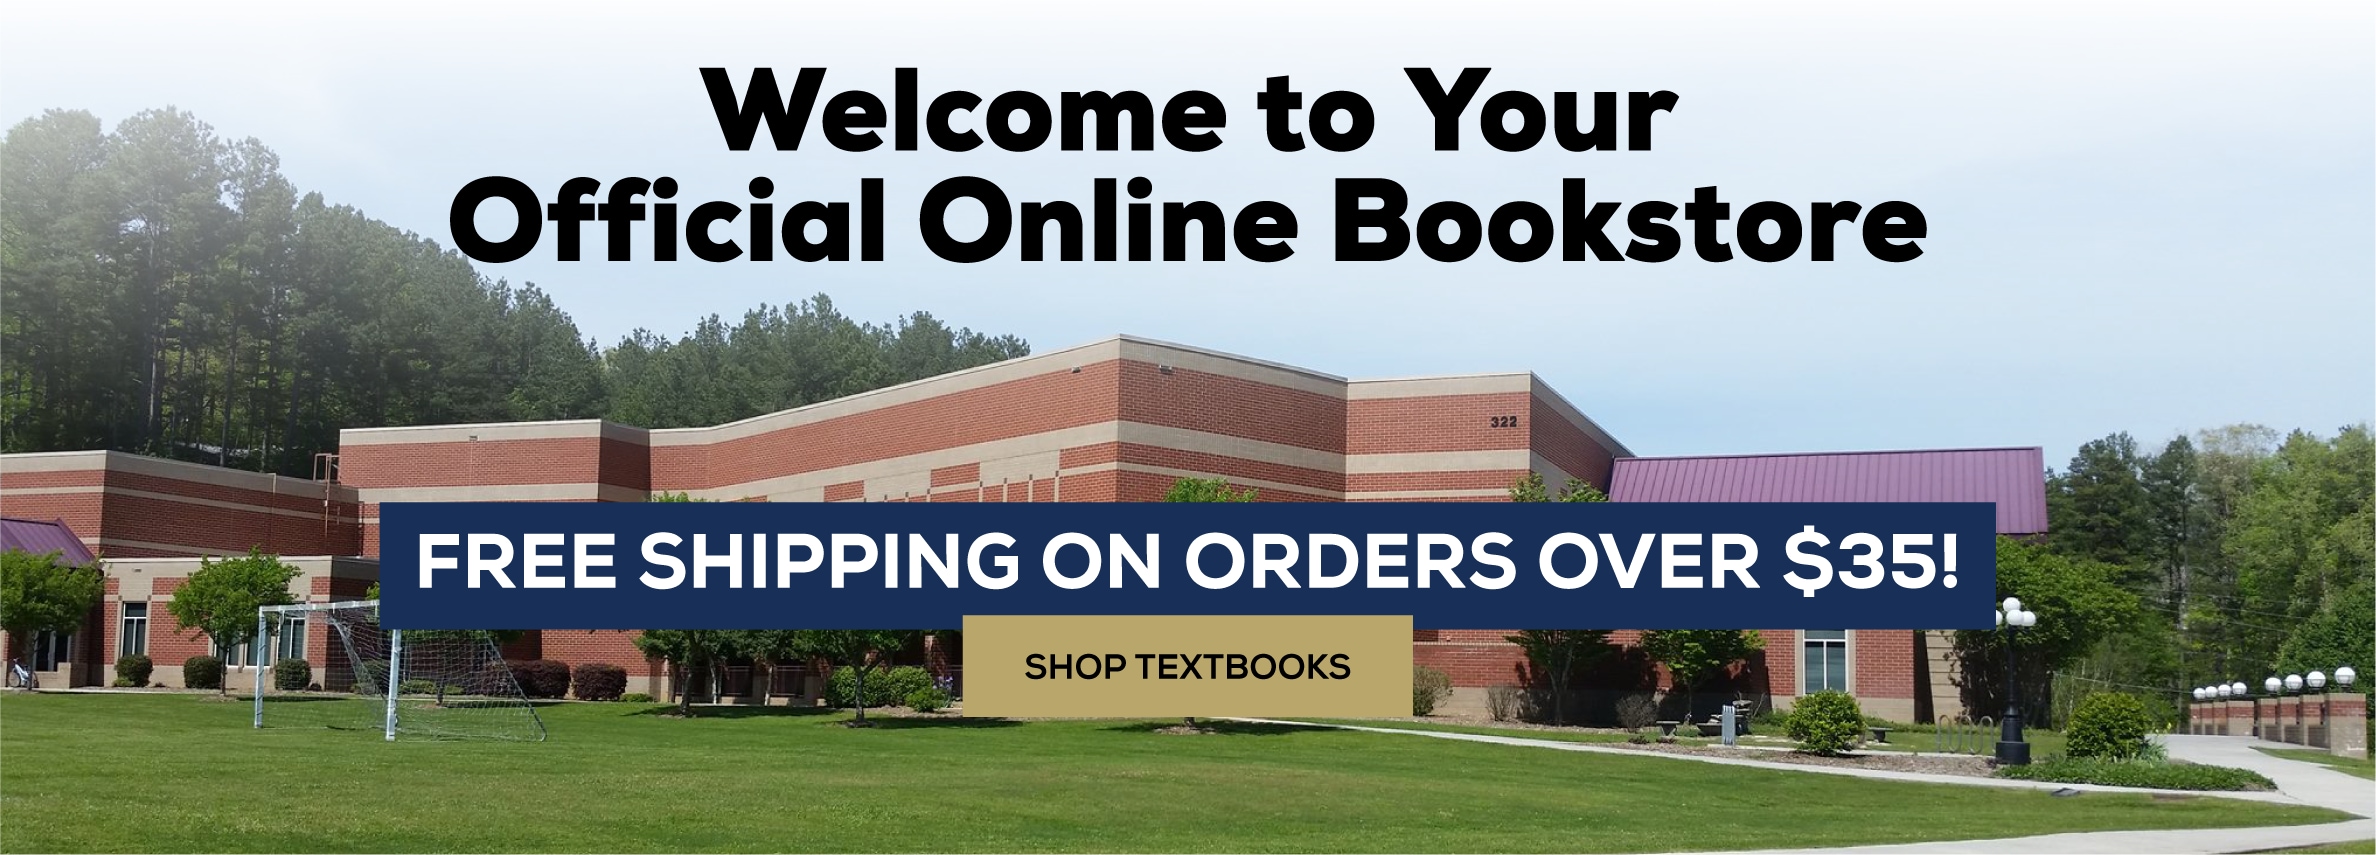 Toccoa Falls College Online Bookstore